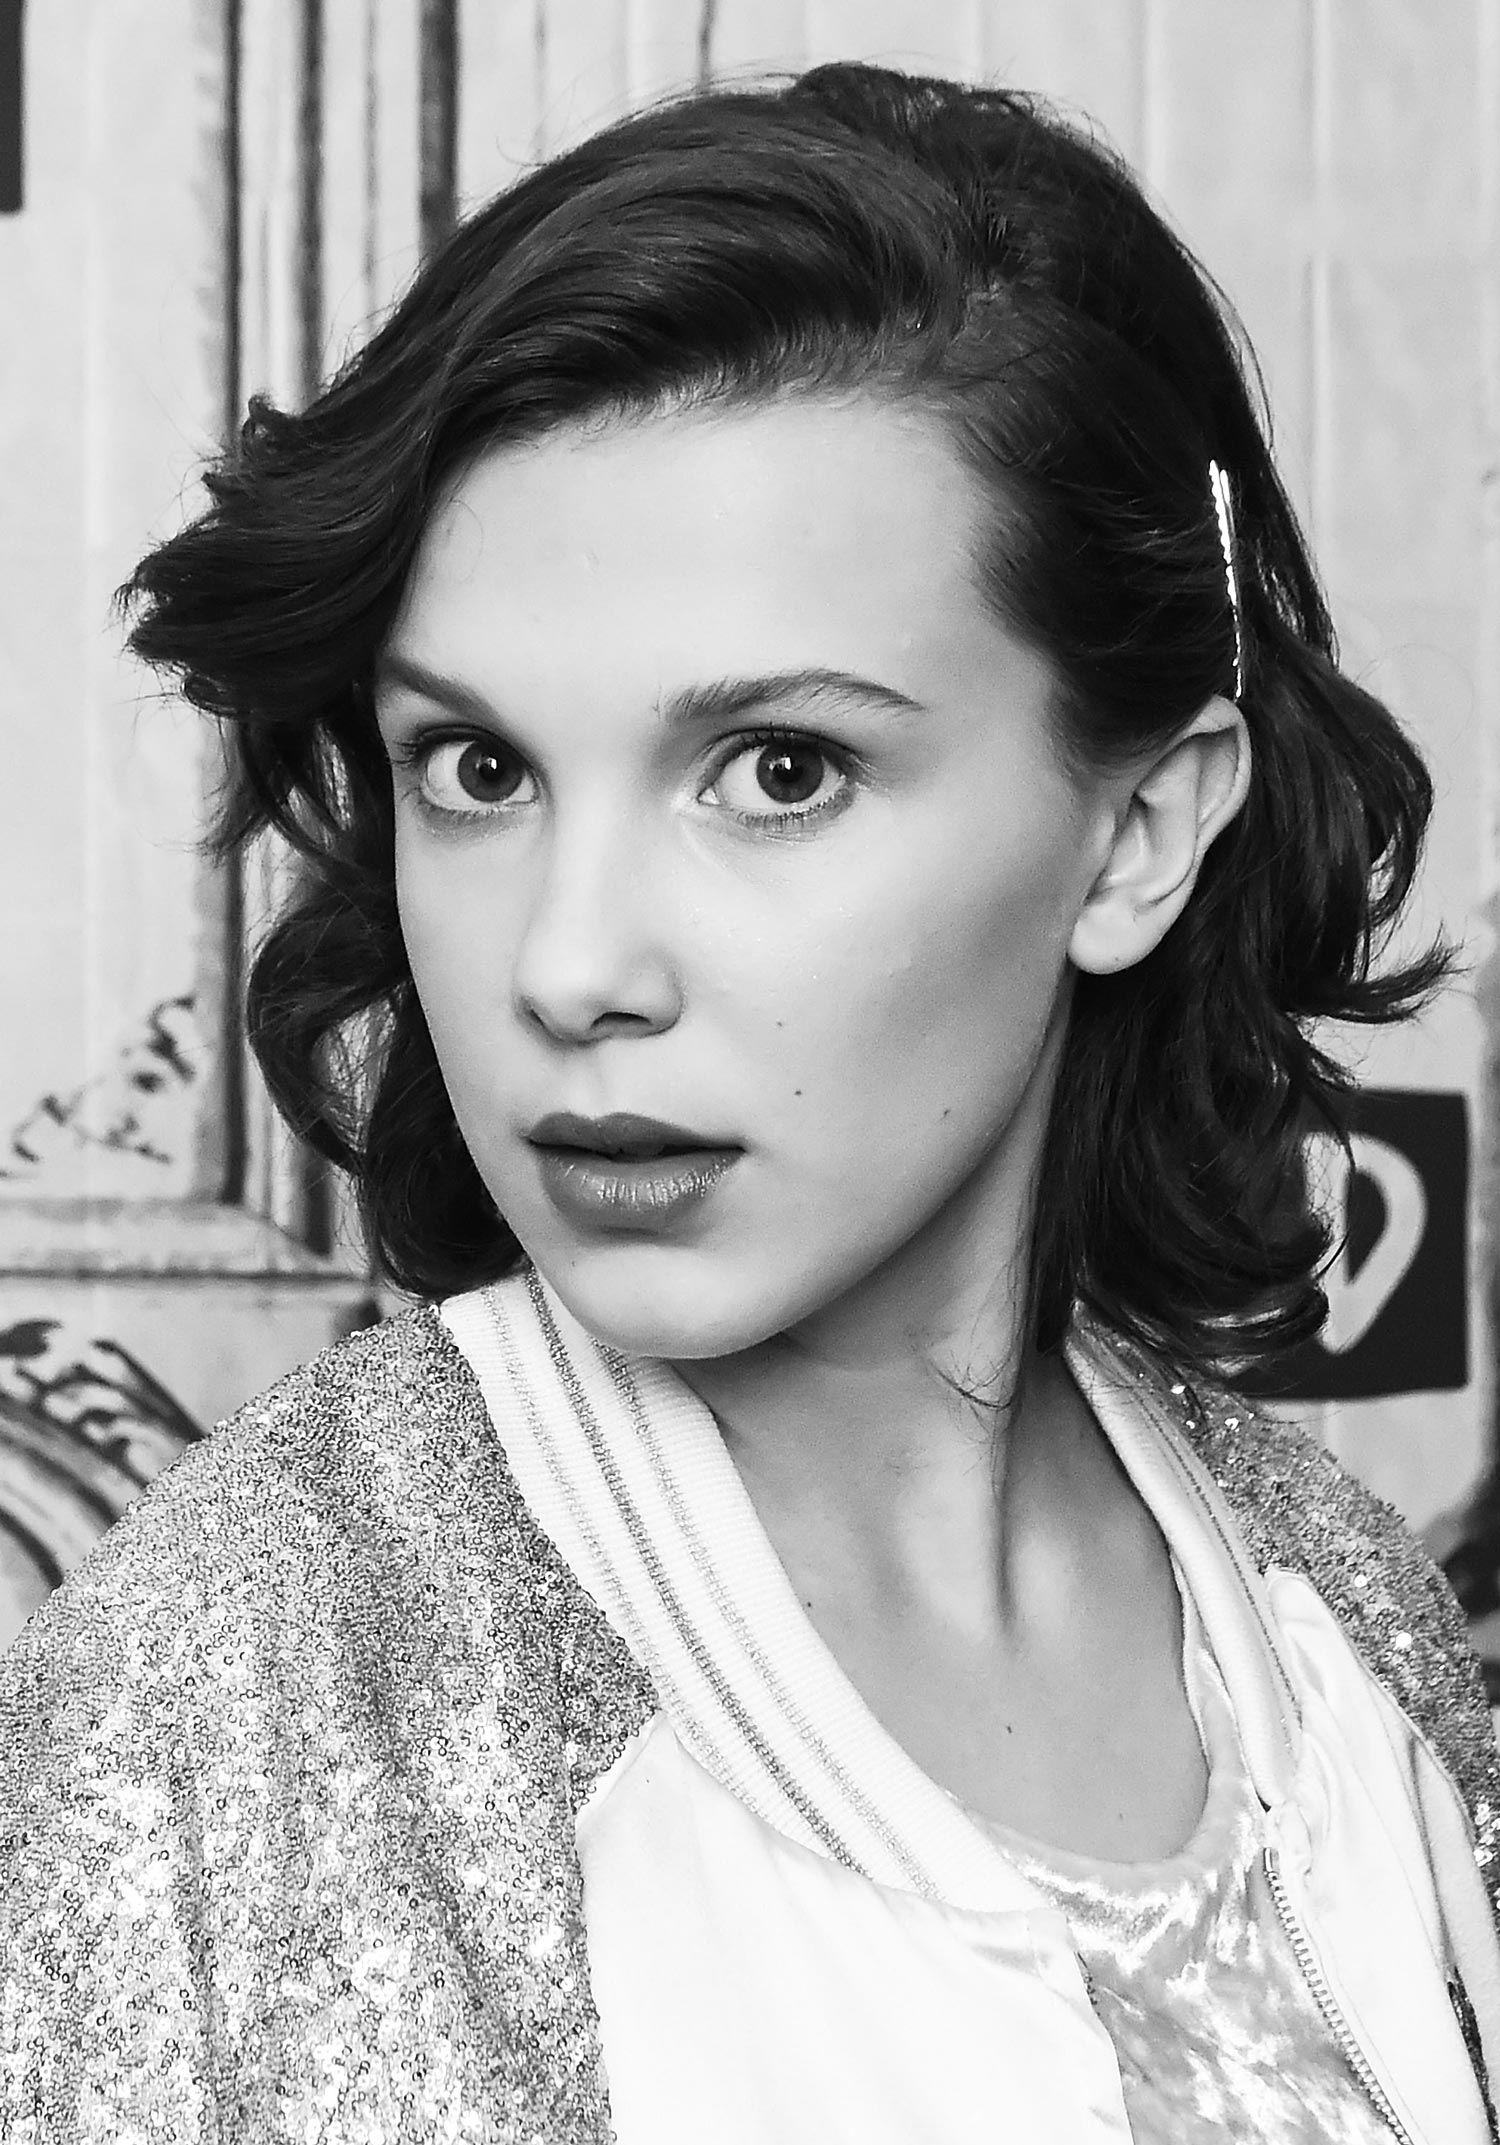 Millie Bobby Brown 2019 Wallpapers